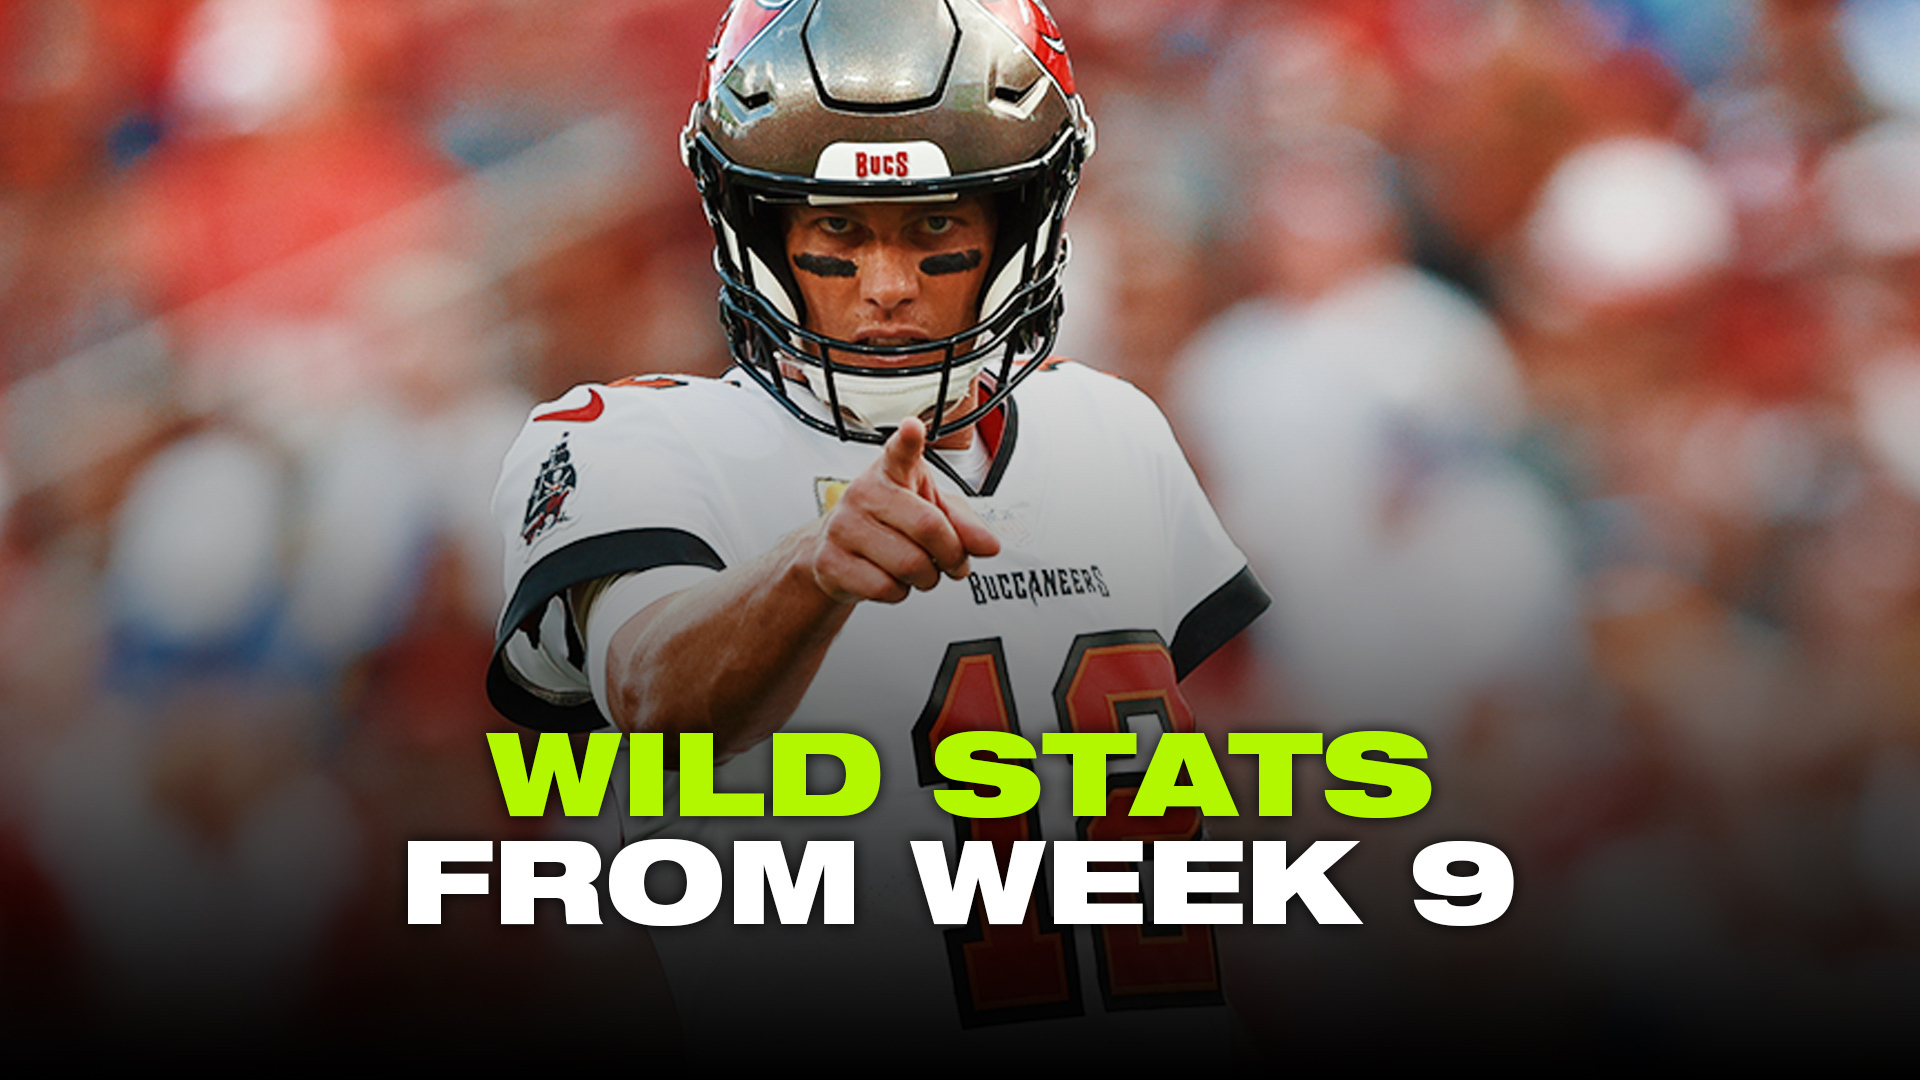 Wildest NFL Stats From Week 9